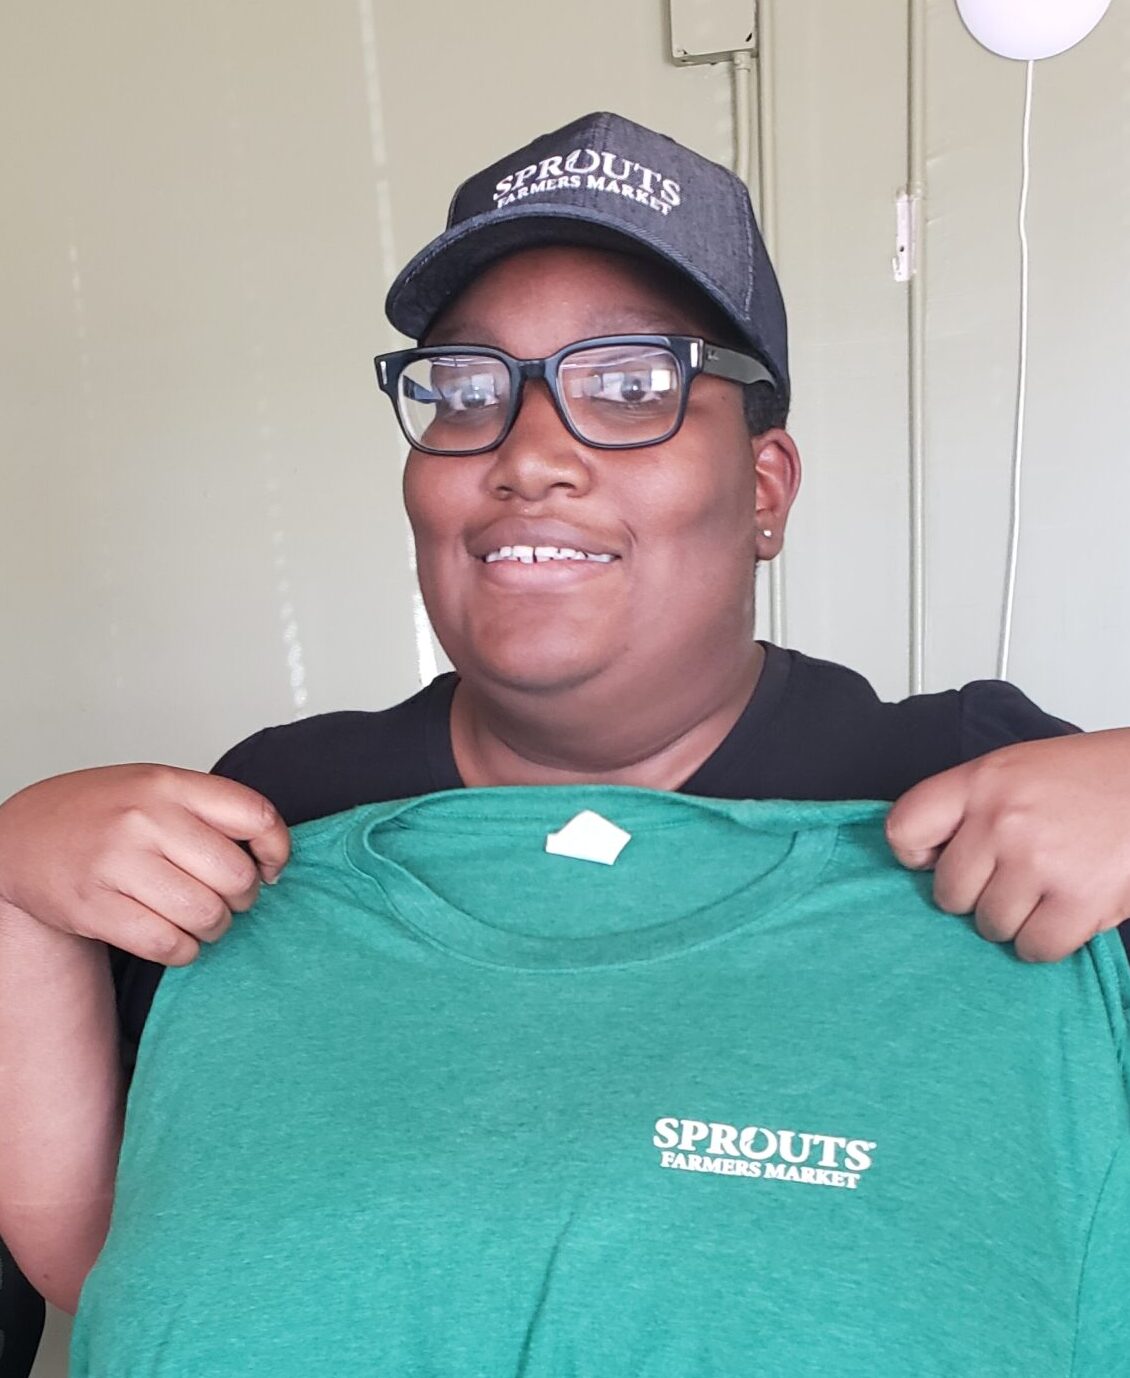 Janika, a Member of The Opportunity Tree's employment services program, smiles and poses with her uniform at Sprouts.